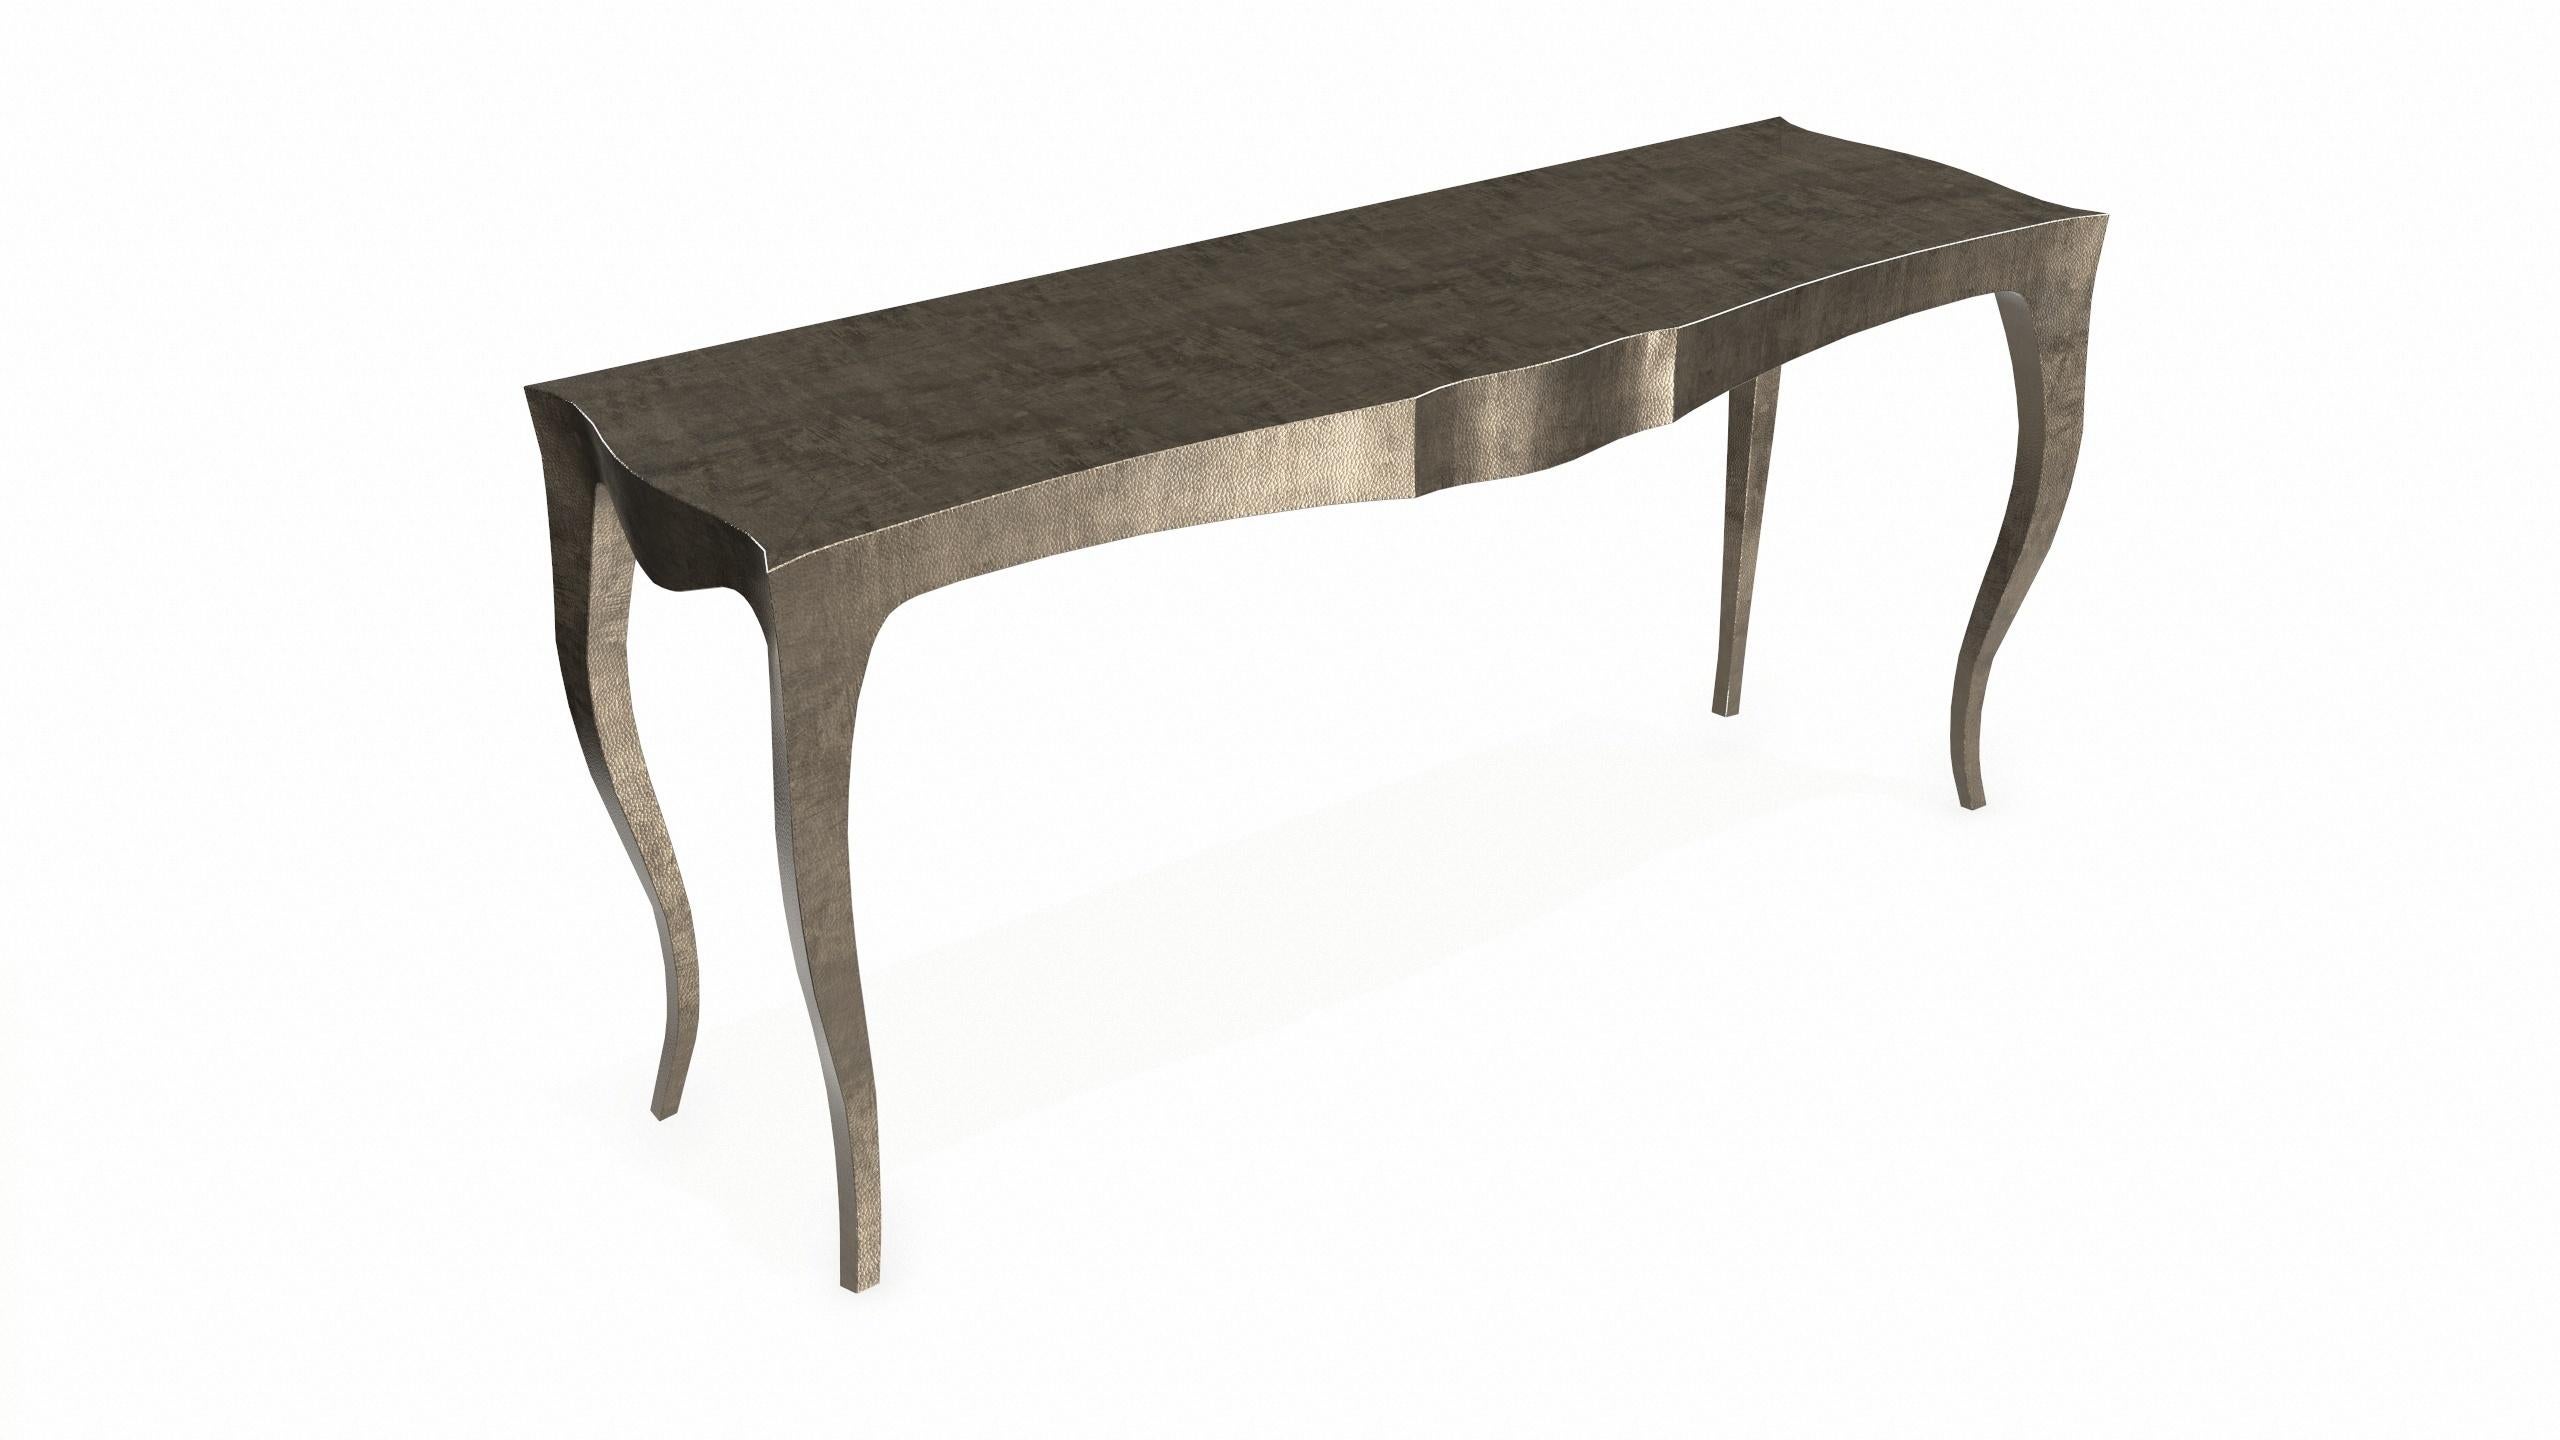 Other Louise Console Art Deco Industrial and Work Tables Mid. Hammered Antique Bronze For Sale